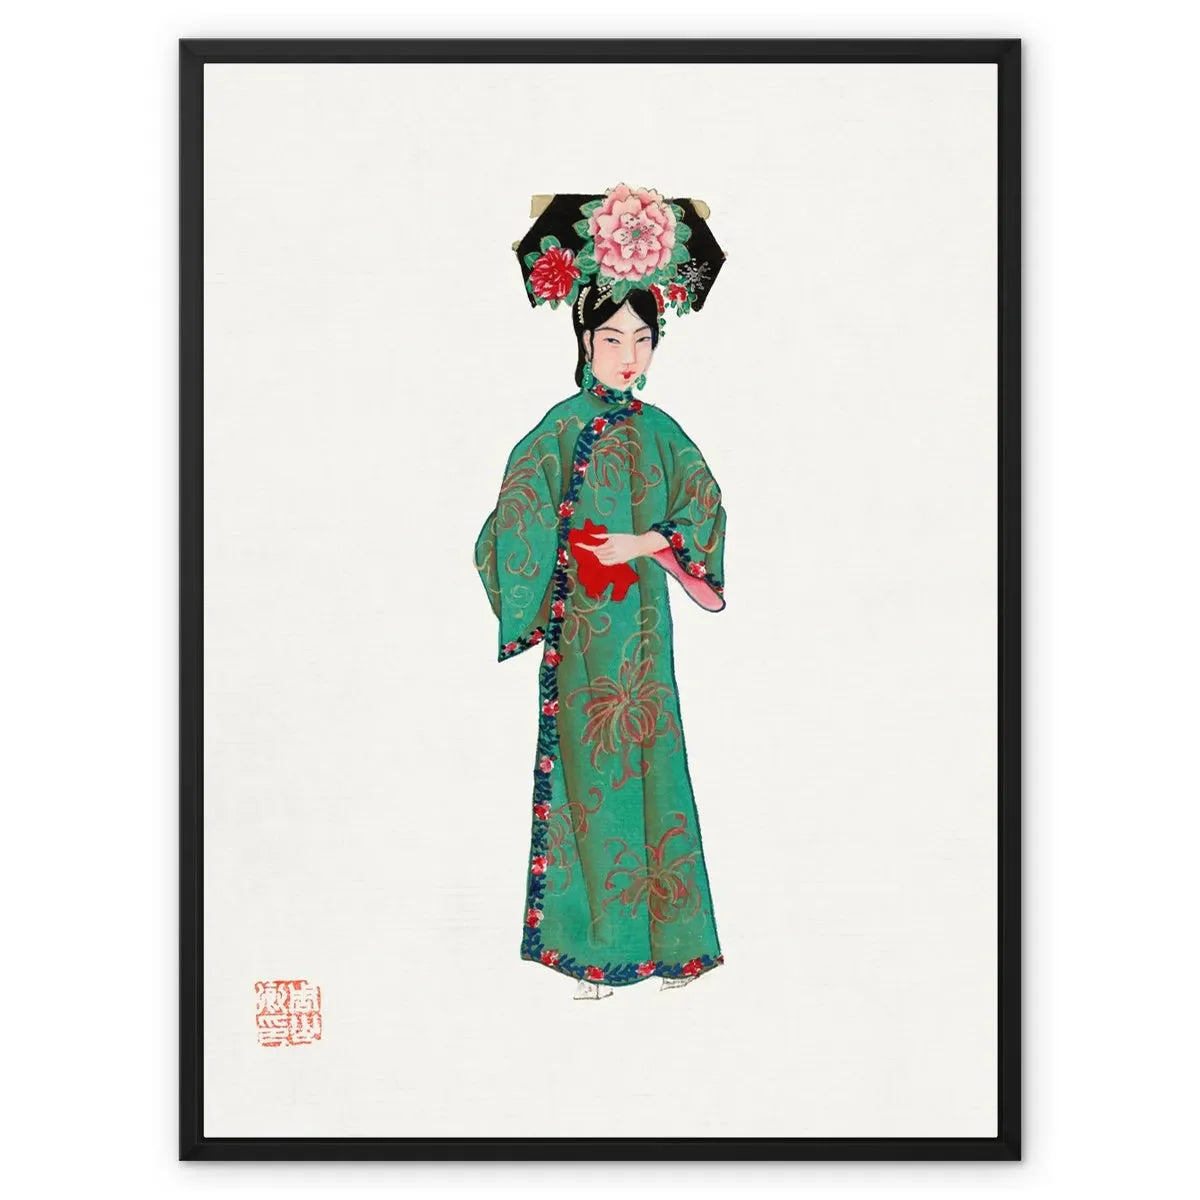 Chinese Noblewoman In Manchu Couture Framed Canvas - 24’x32’ / Black Frame / White Wrap - Posters Prints & Visual